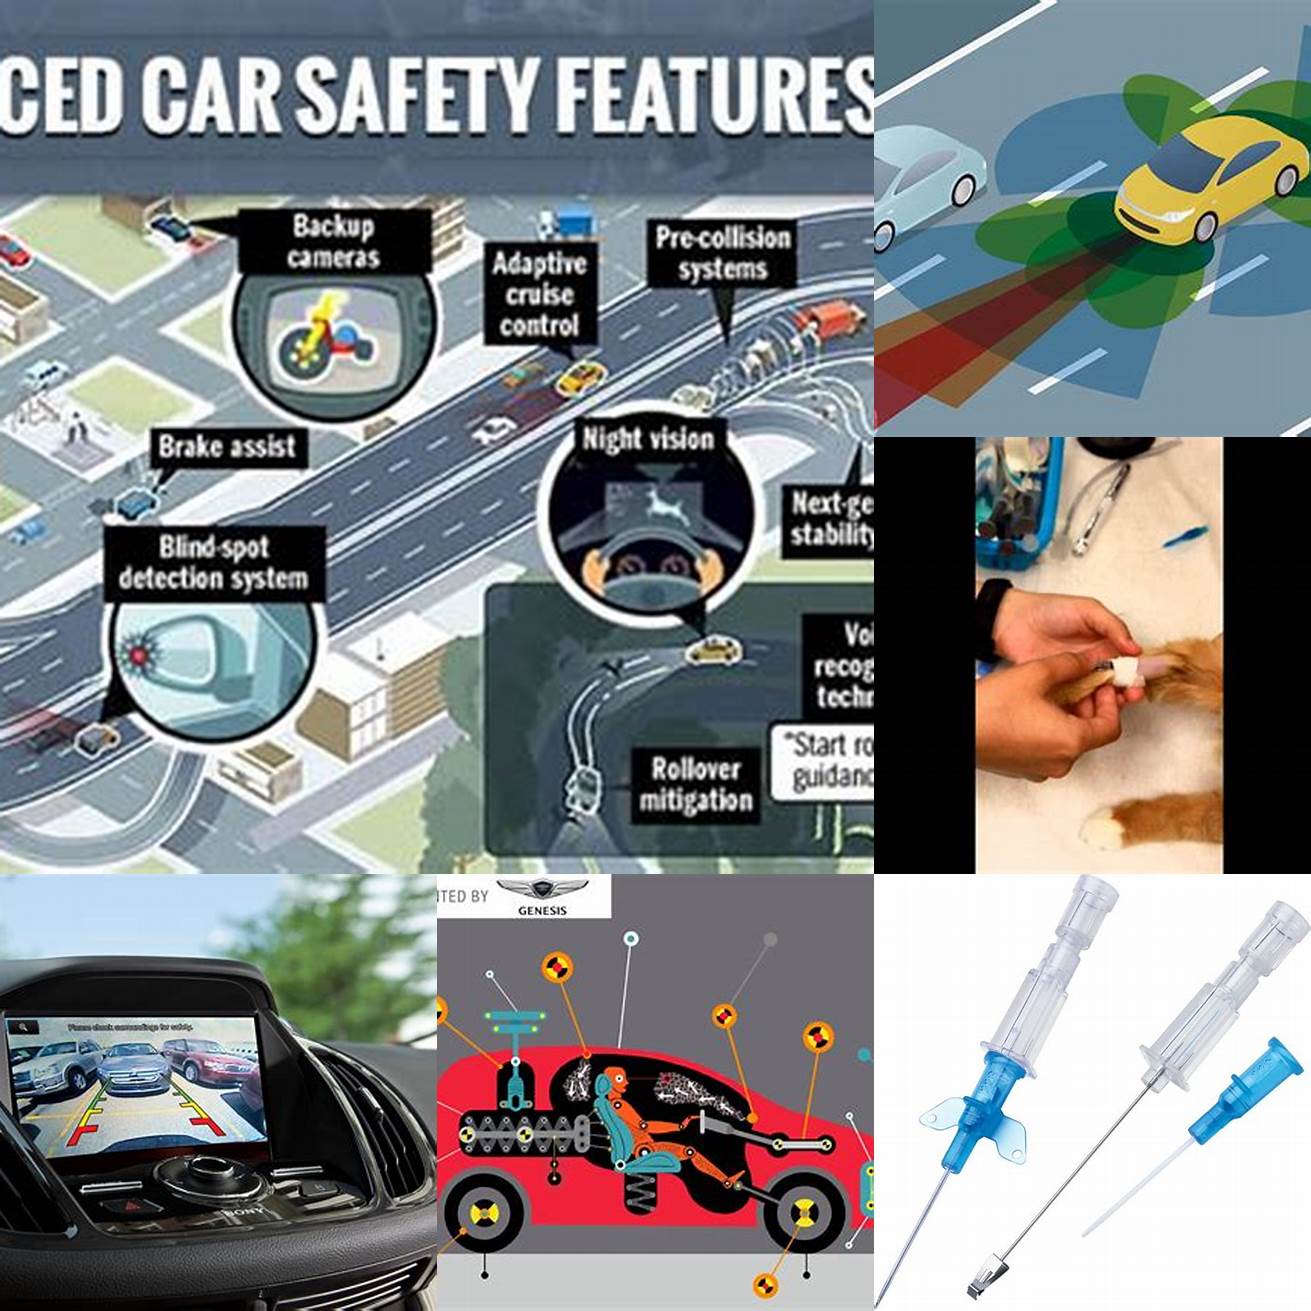 4 Advanced Safety Features